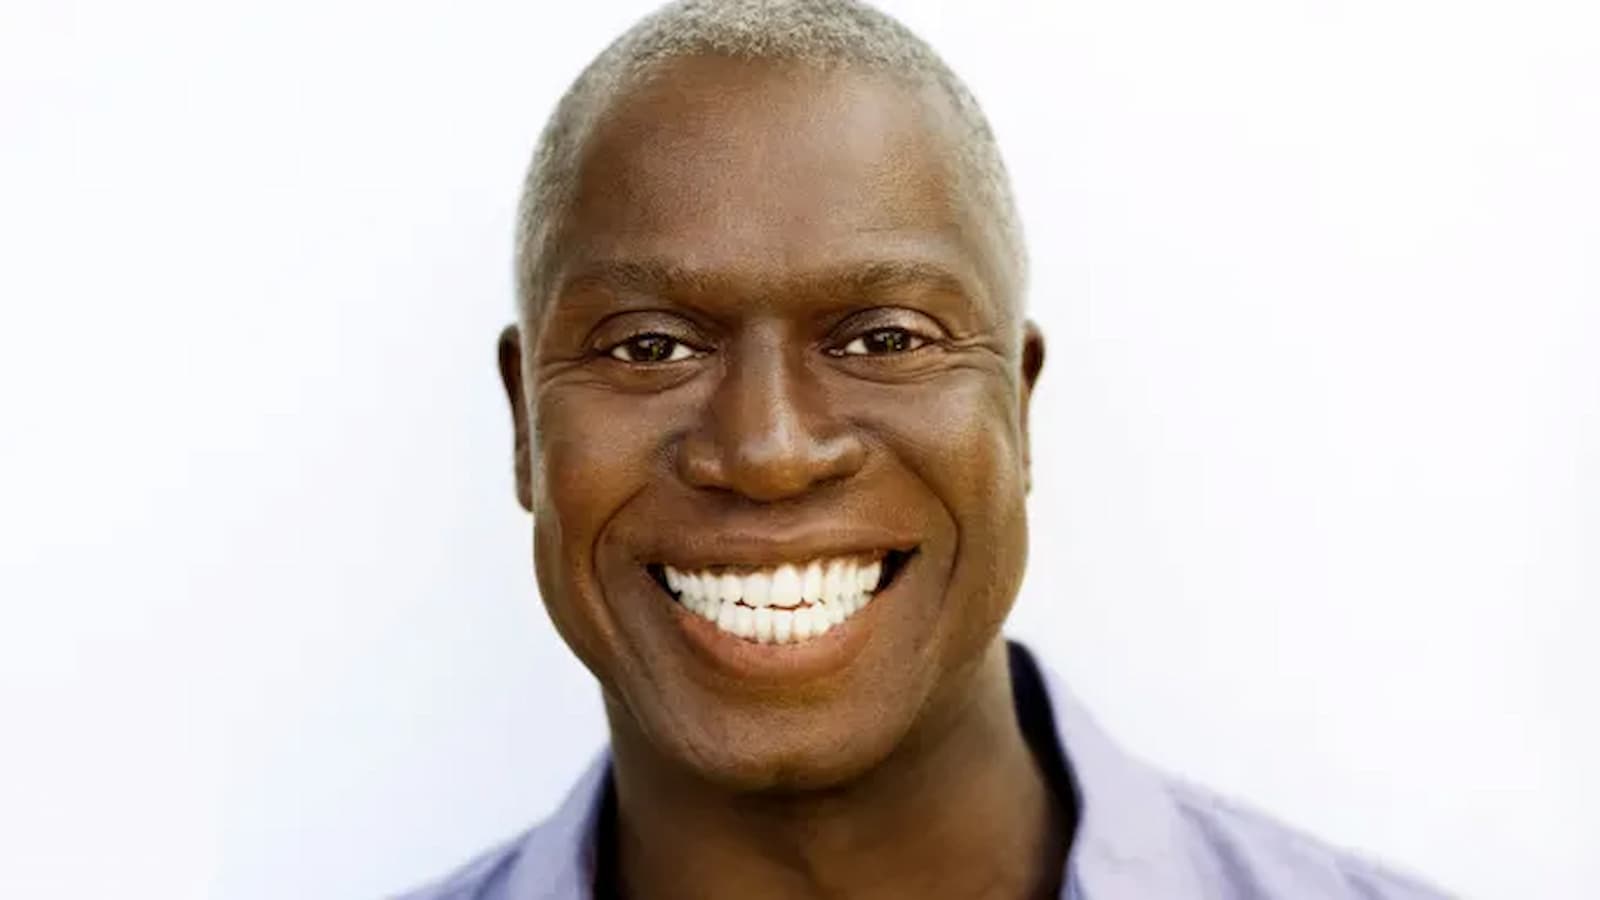 Brooklyn Nine-nine Actor Andre Braugher Passes Away at 61; cause of death